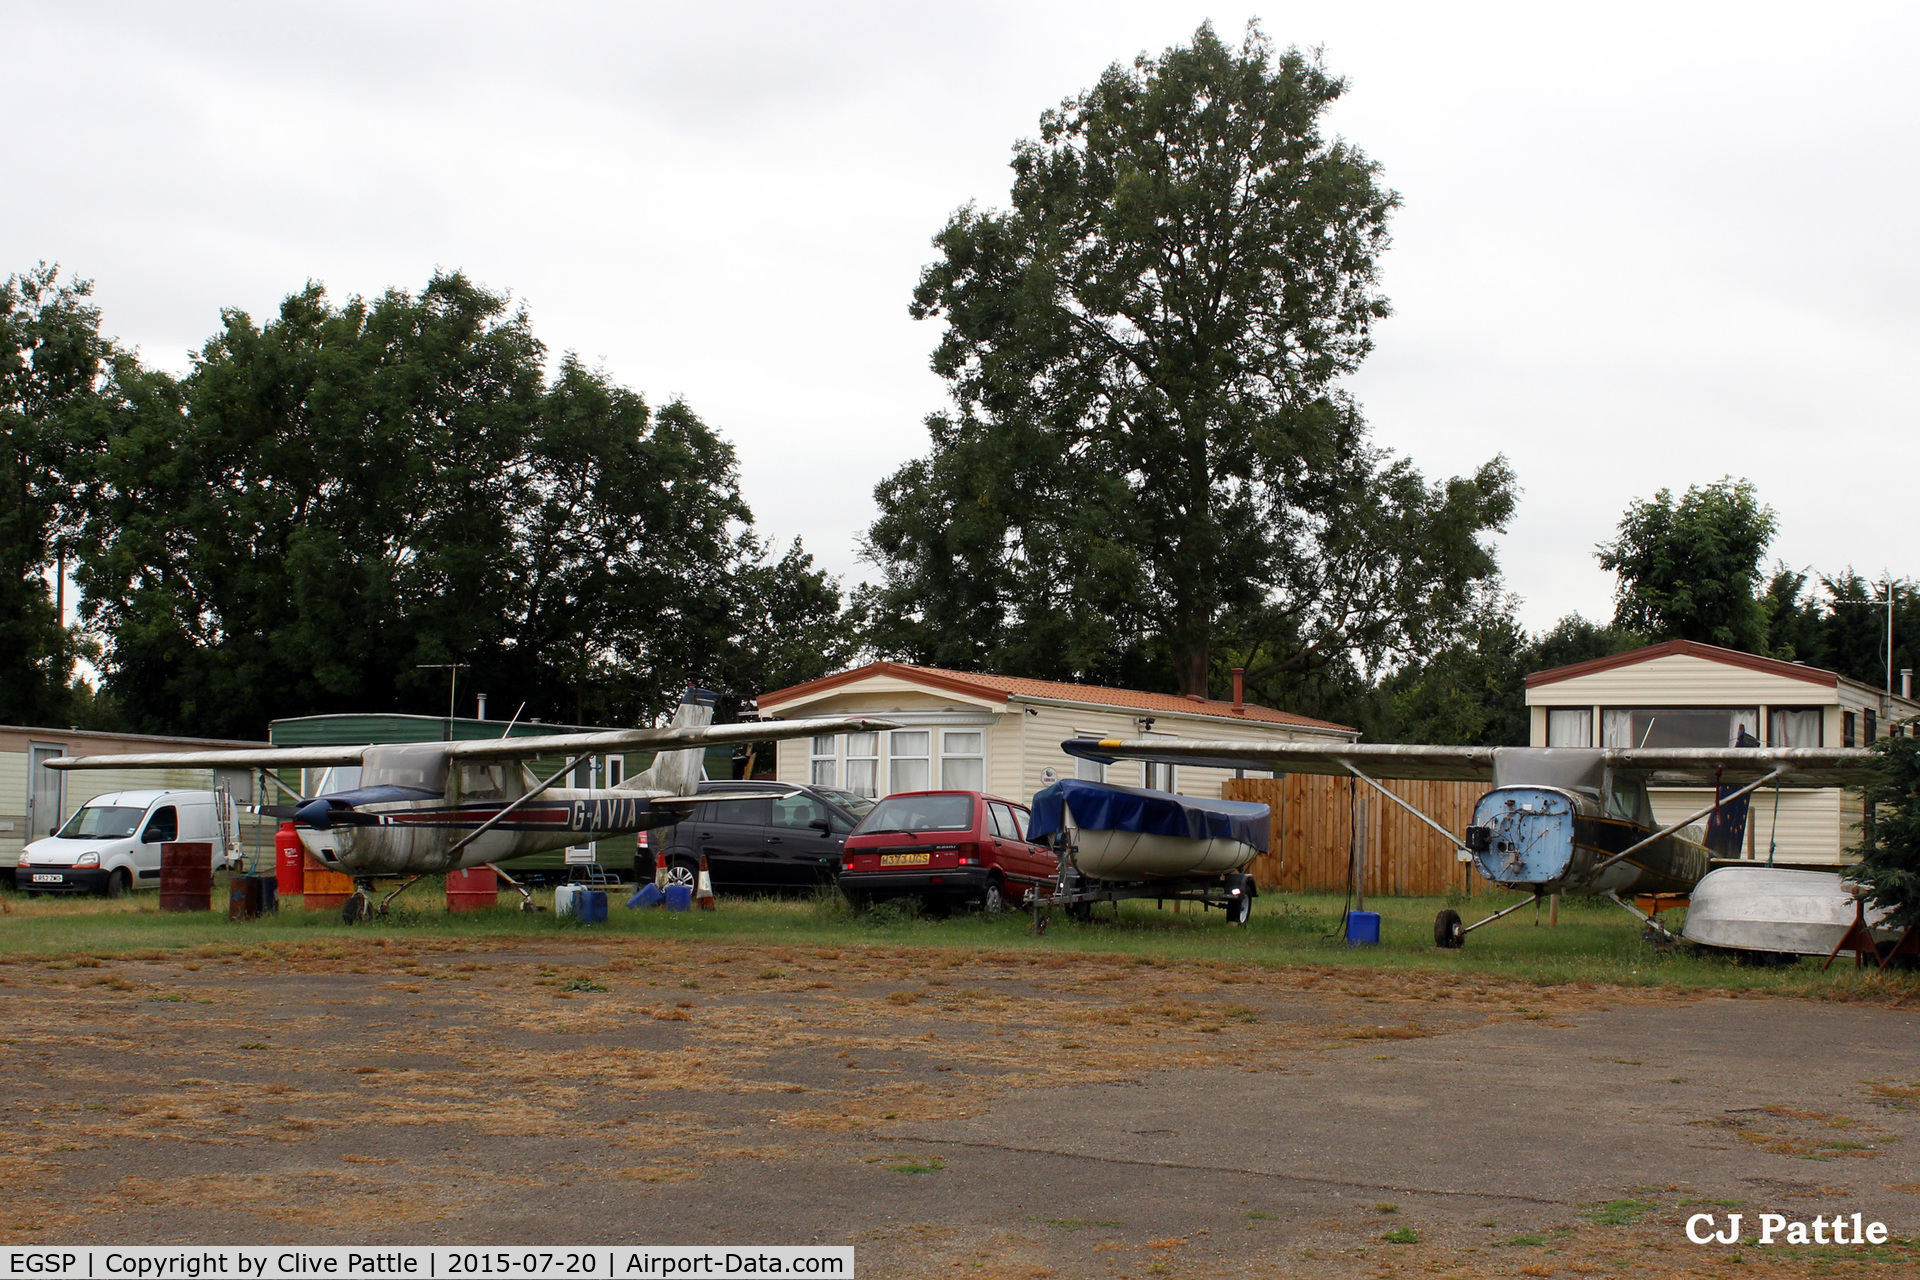 Peterborough/Sibson Airport, Peterborough, England United Kingdom (EGSP) - The shanty town area at the rear of the airfield at Sibson EGSP, used for temp accom for parachutists, skydivers and their families.